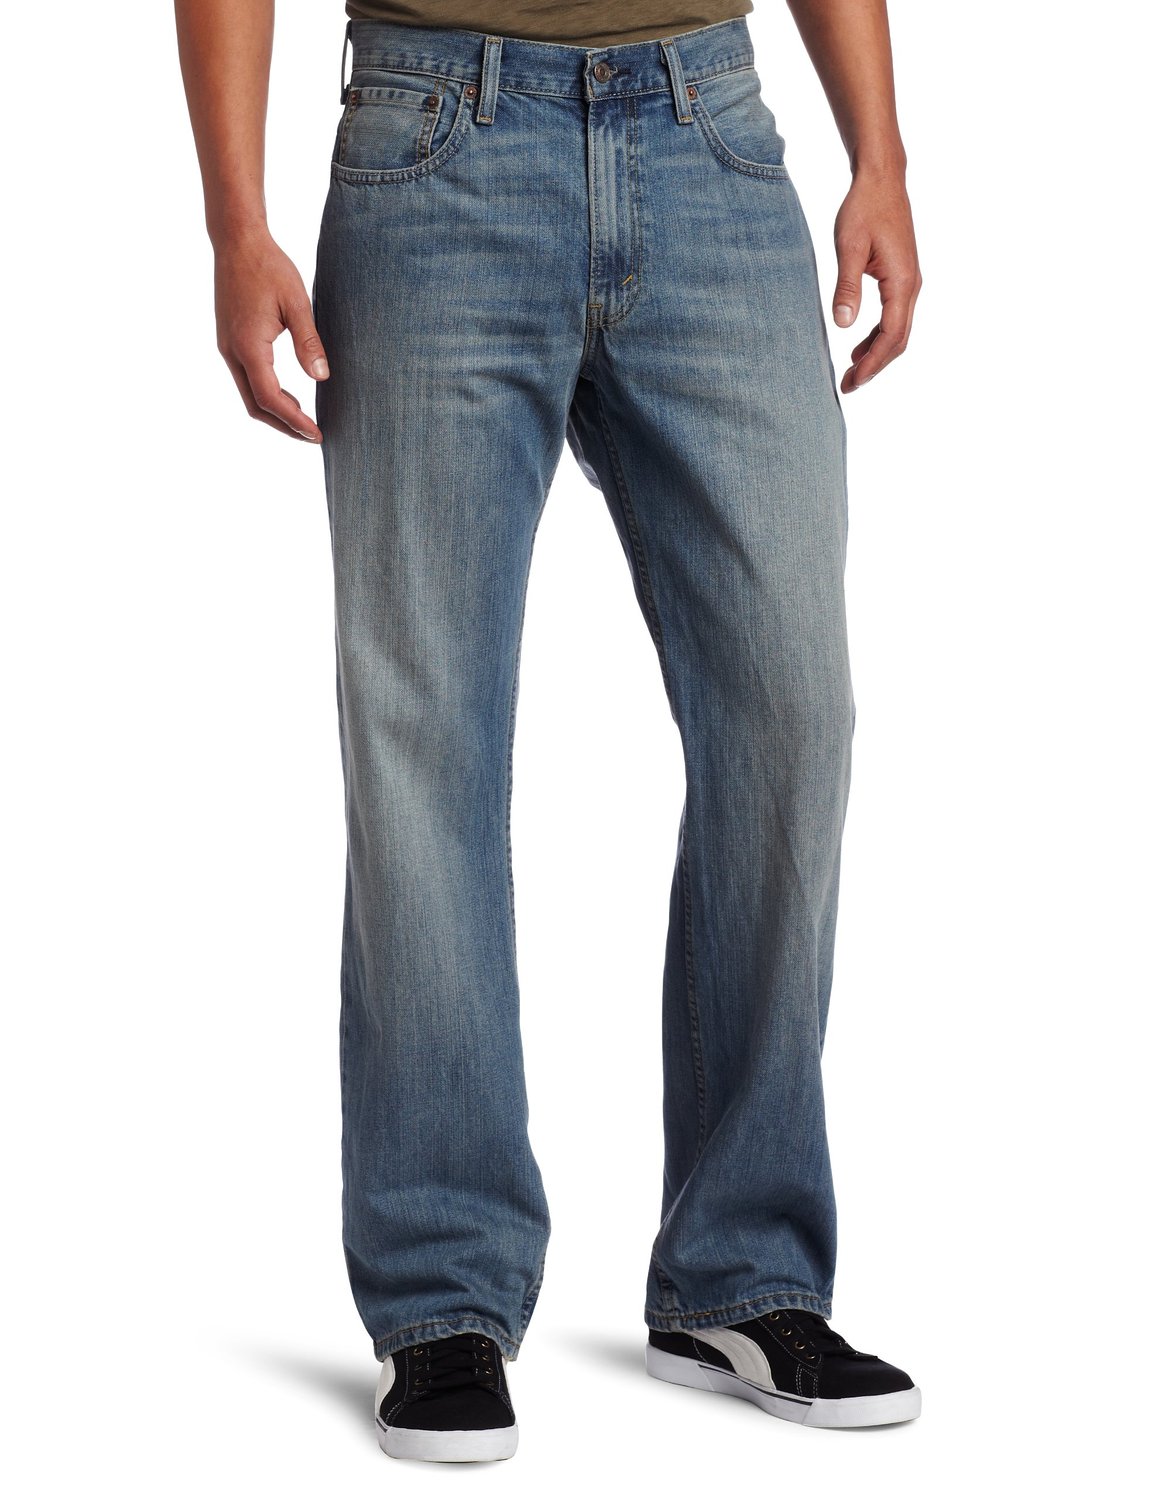 levis 569 relaxed fit